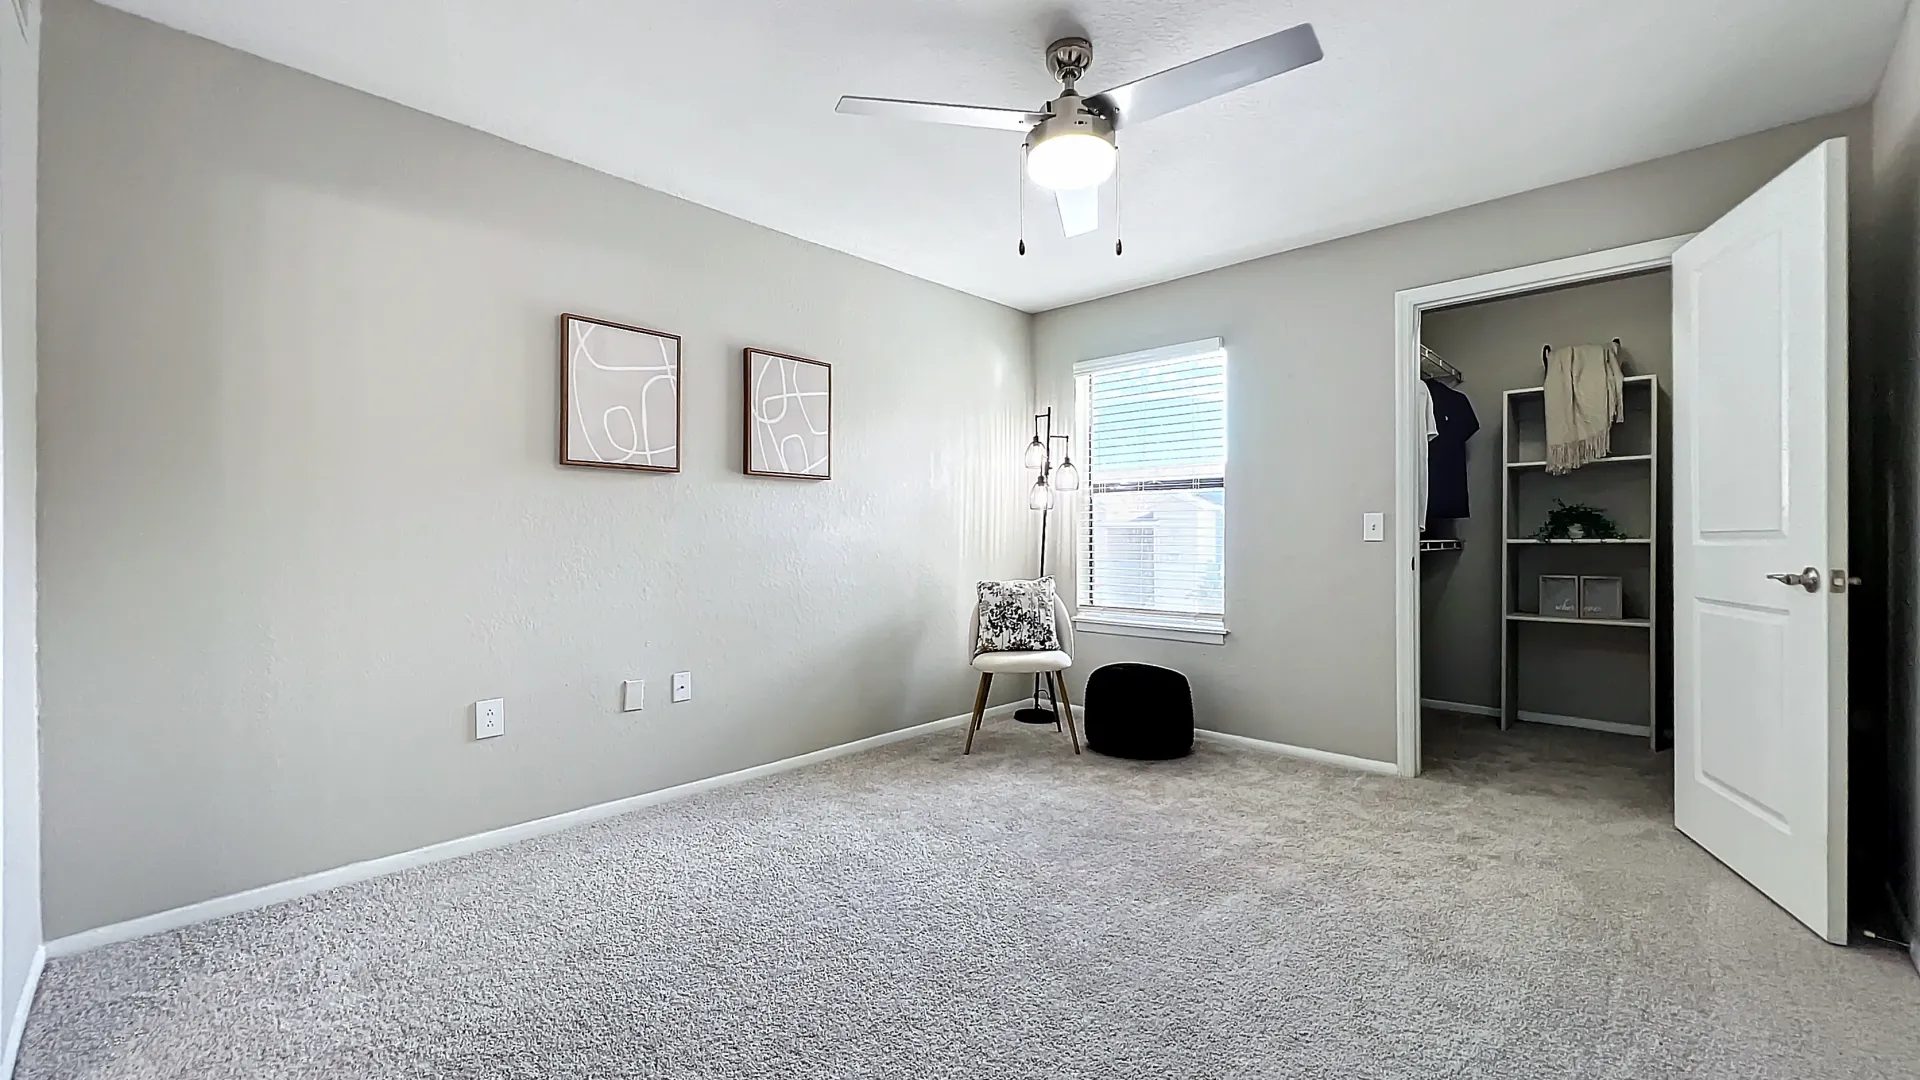 Cozy bedroom with plush carpeting, modern decor, a ceiling fan, a large window, and a spacious closet.